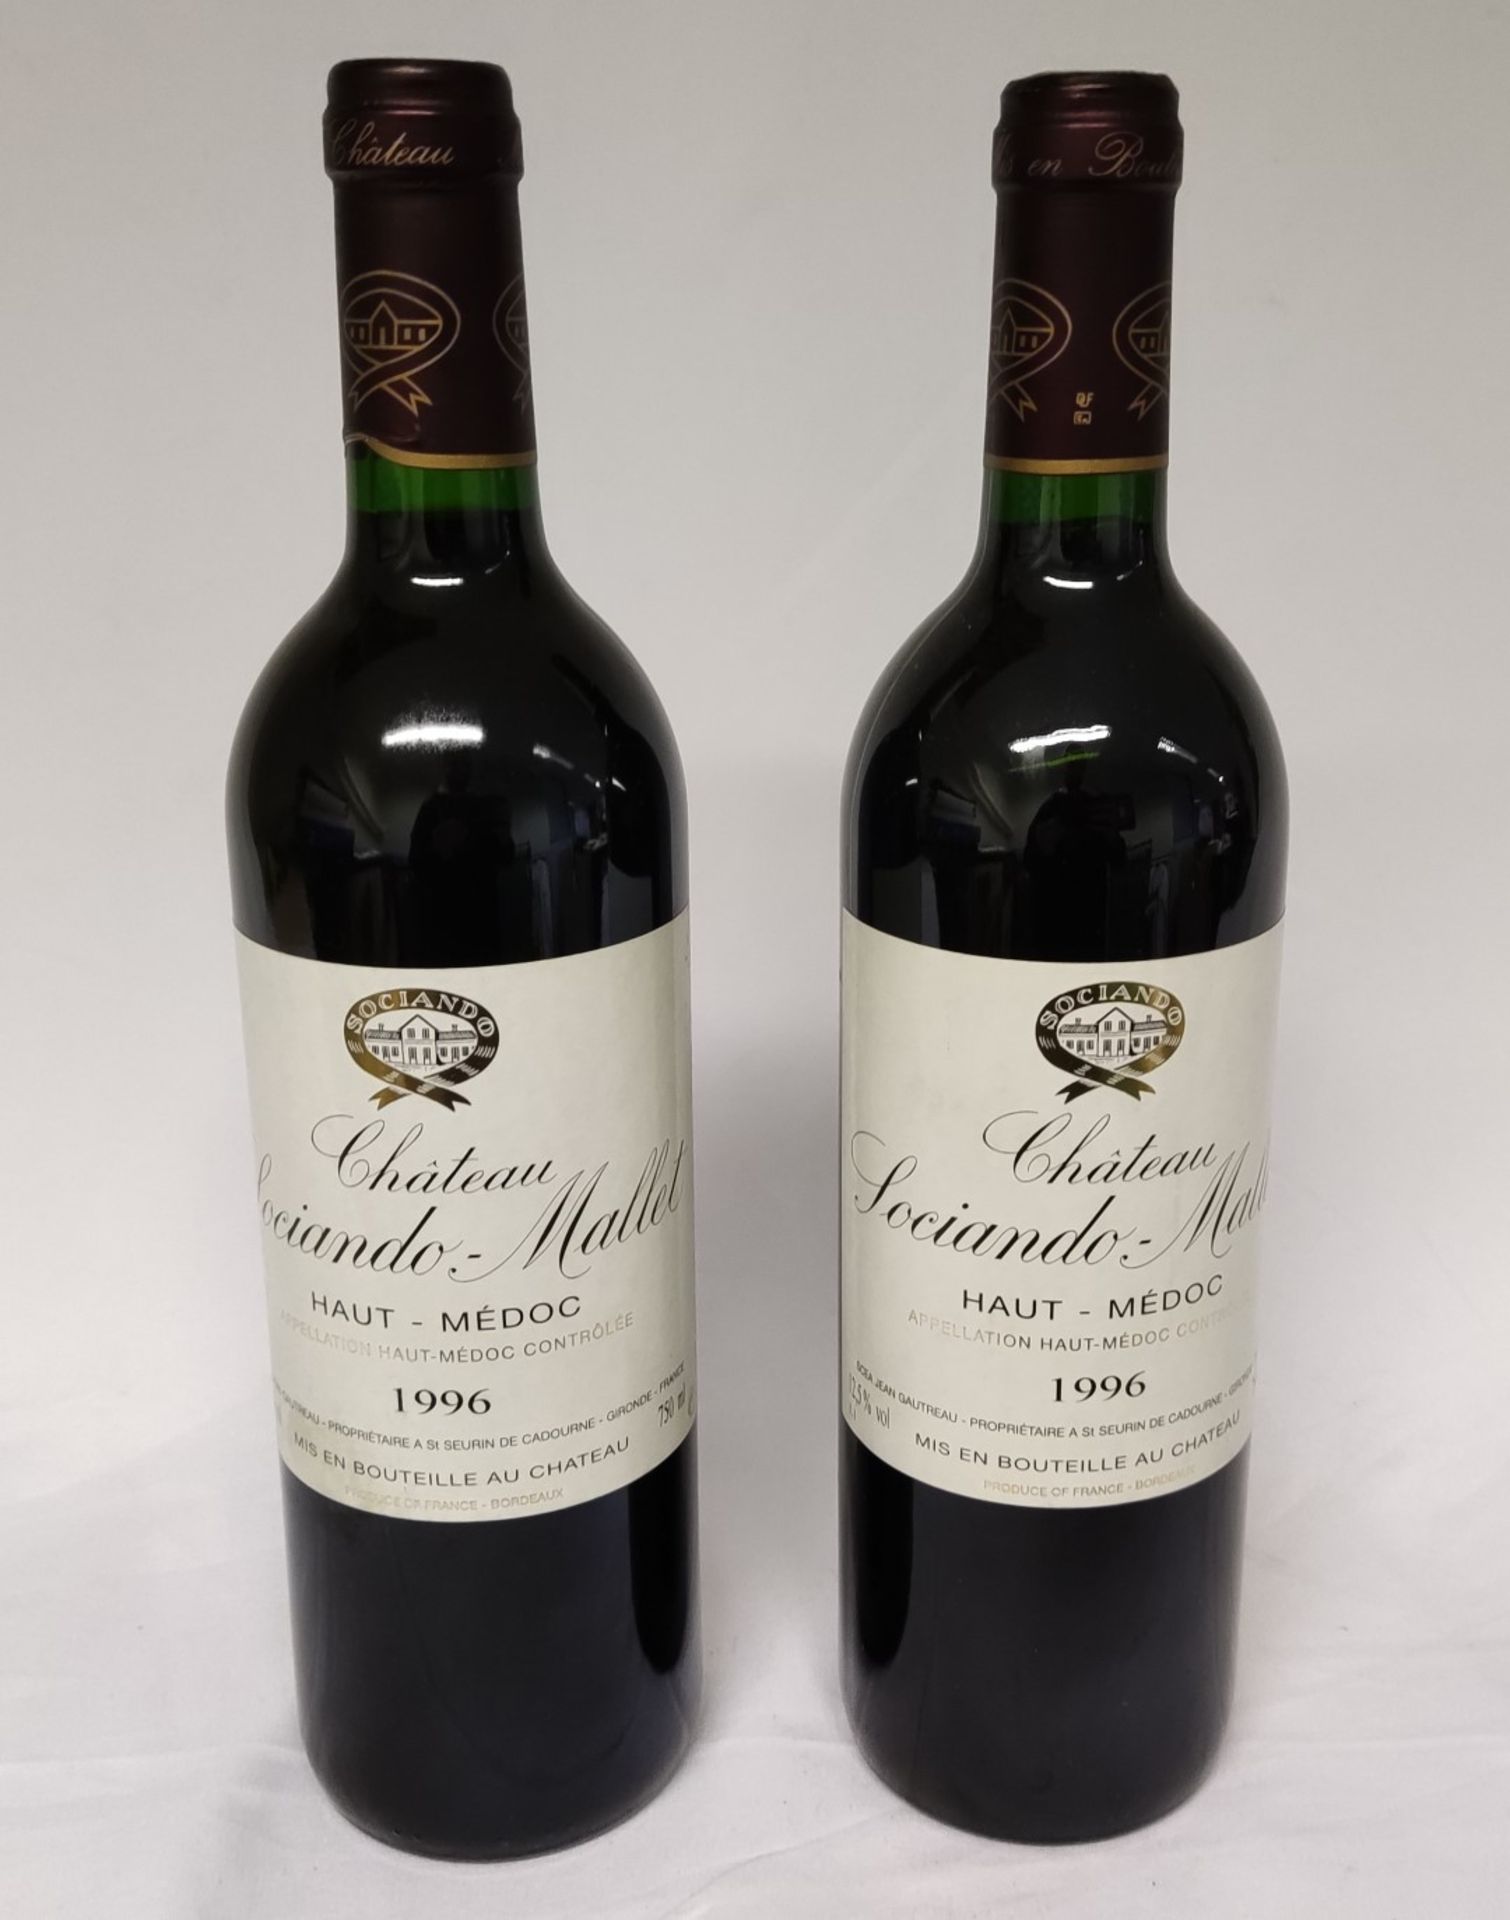 2 x Bottles of 1996 Chateau Sociando-Mallet, Haut-Medoc, France - Dry Red Wine - RRP £260